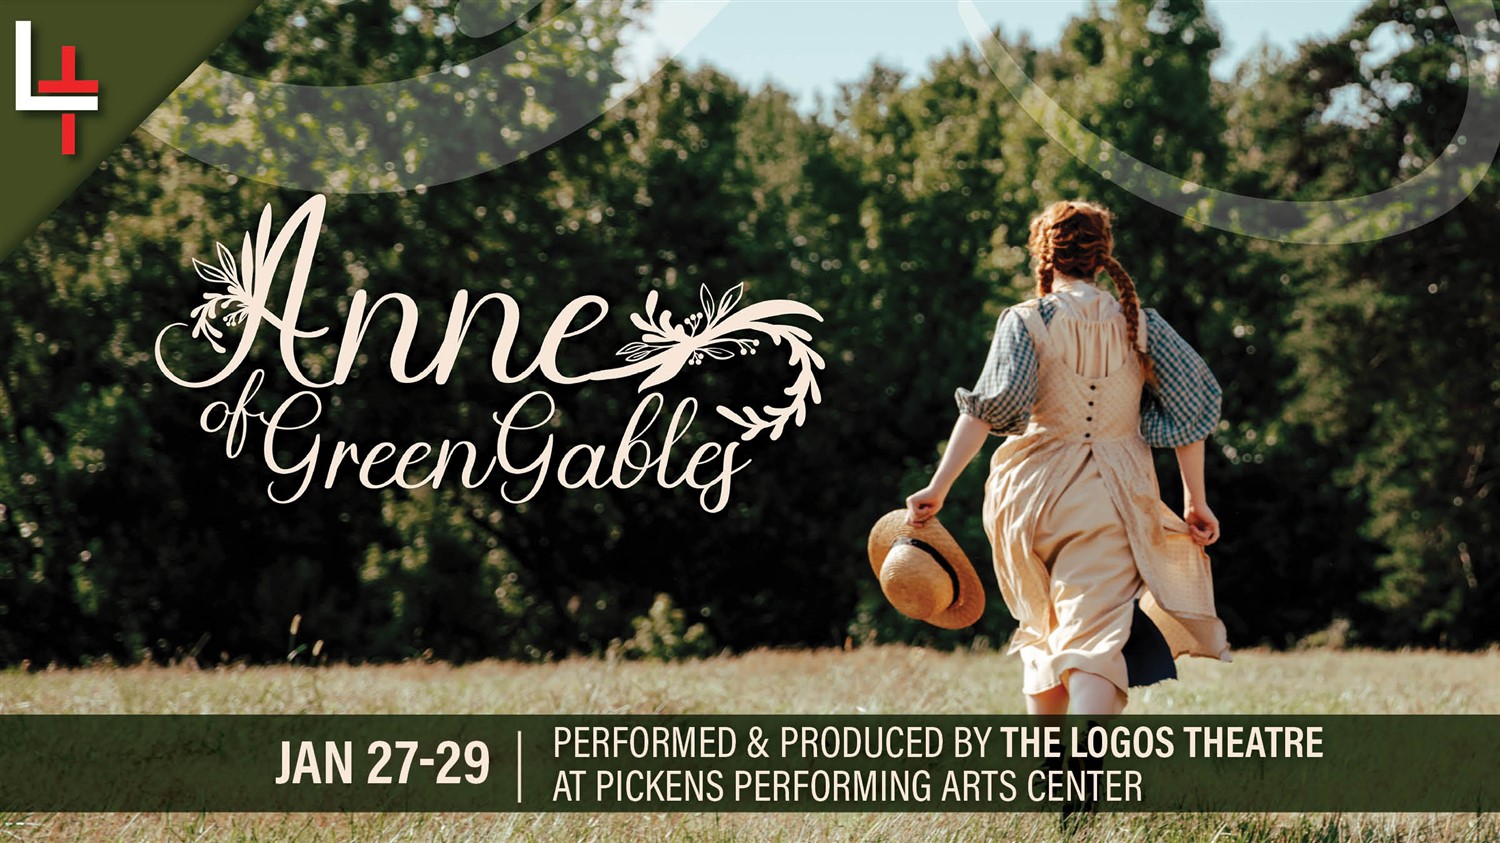 Anne of Green Gables A Logos Theatre Production on ene. 31, 00:00@Pickens County Performing Arts Center - Buy tickets and Get information on Take Part Tickets takepartickets.com